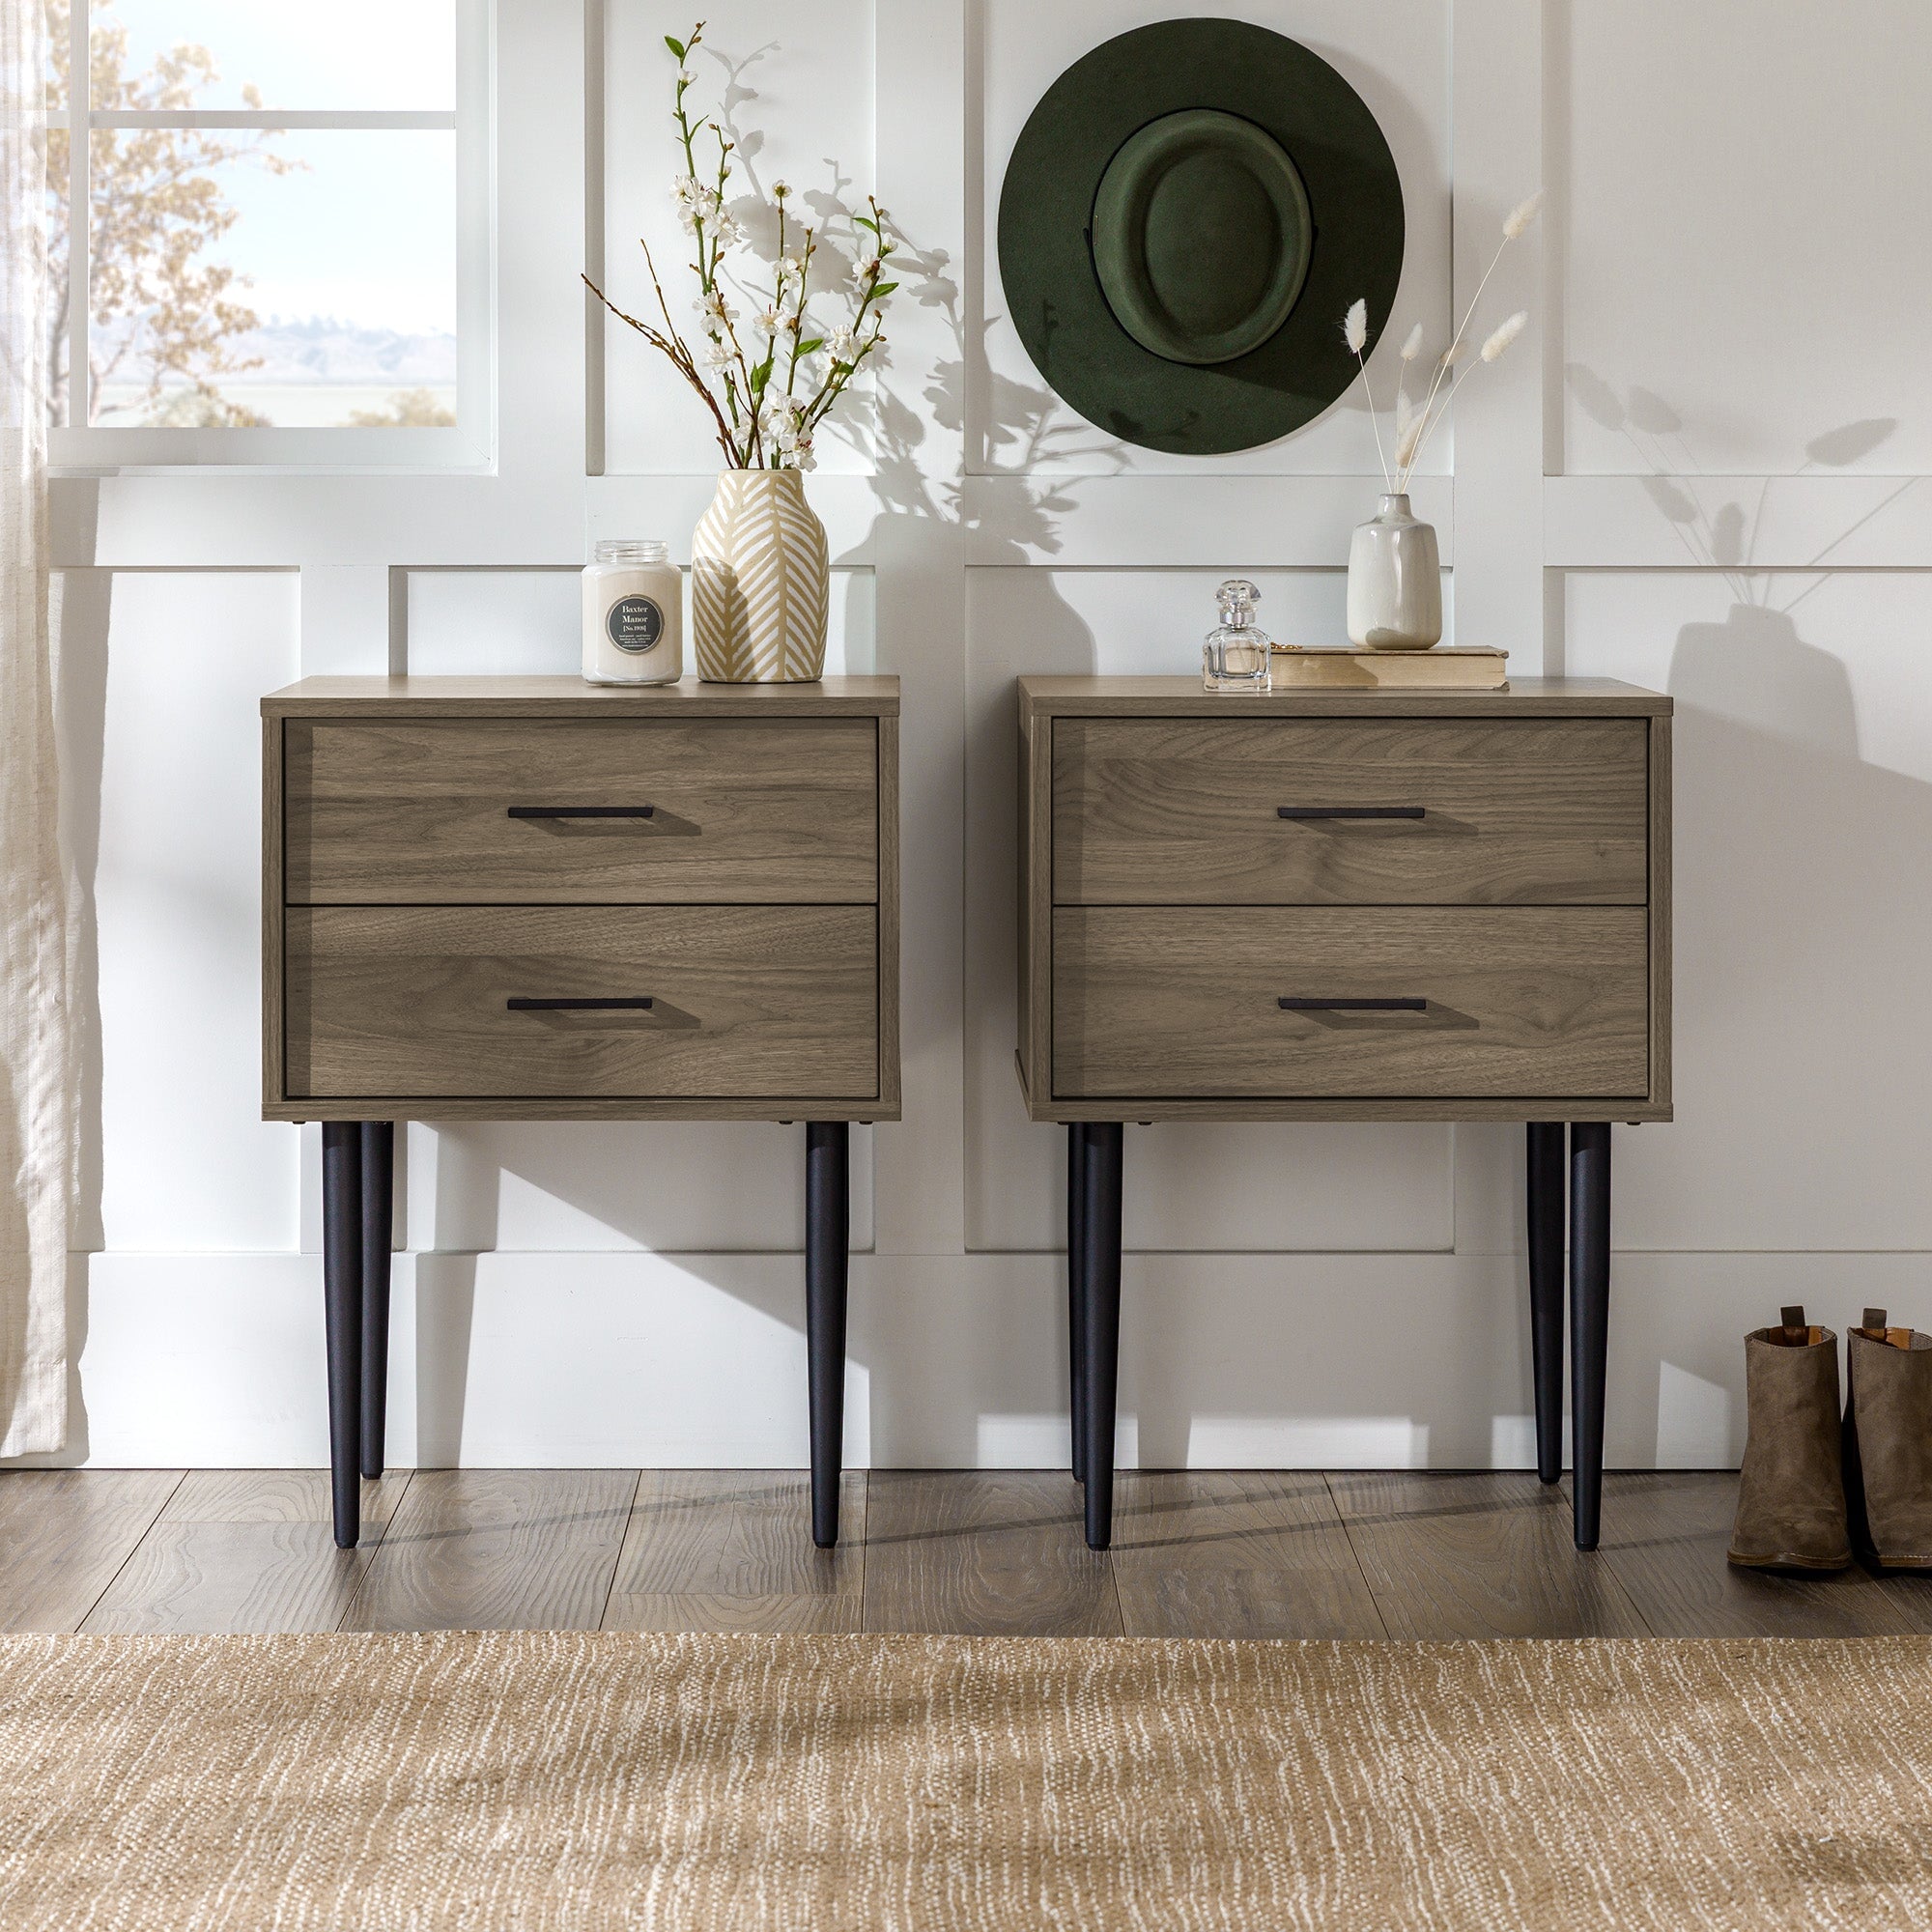 2-Drawer White Nightstands Side Table Bedside Table 18.9 in. H x 15.7 in. W  x 11.6 in. D